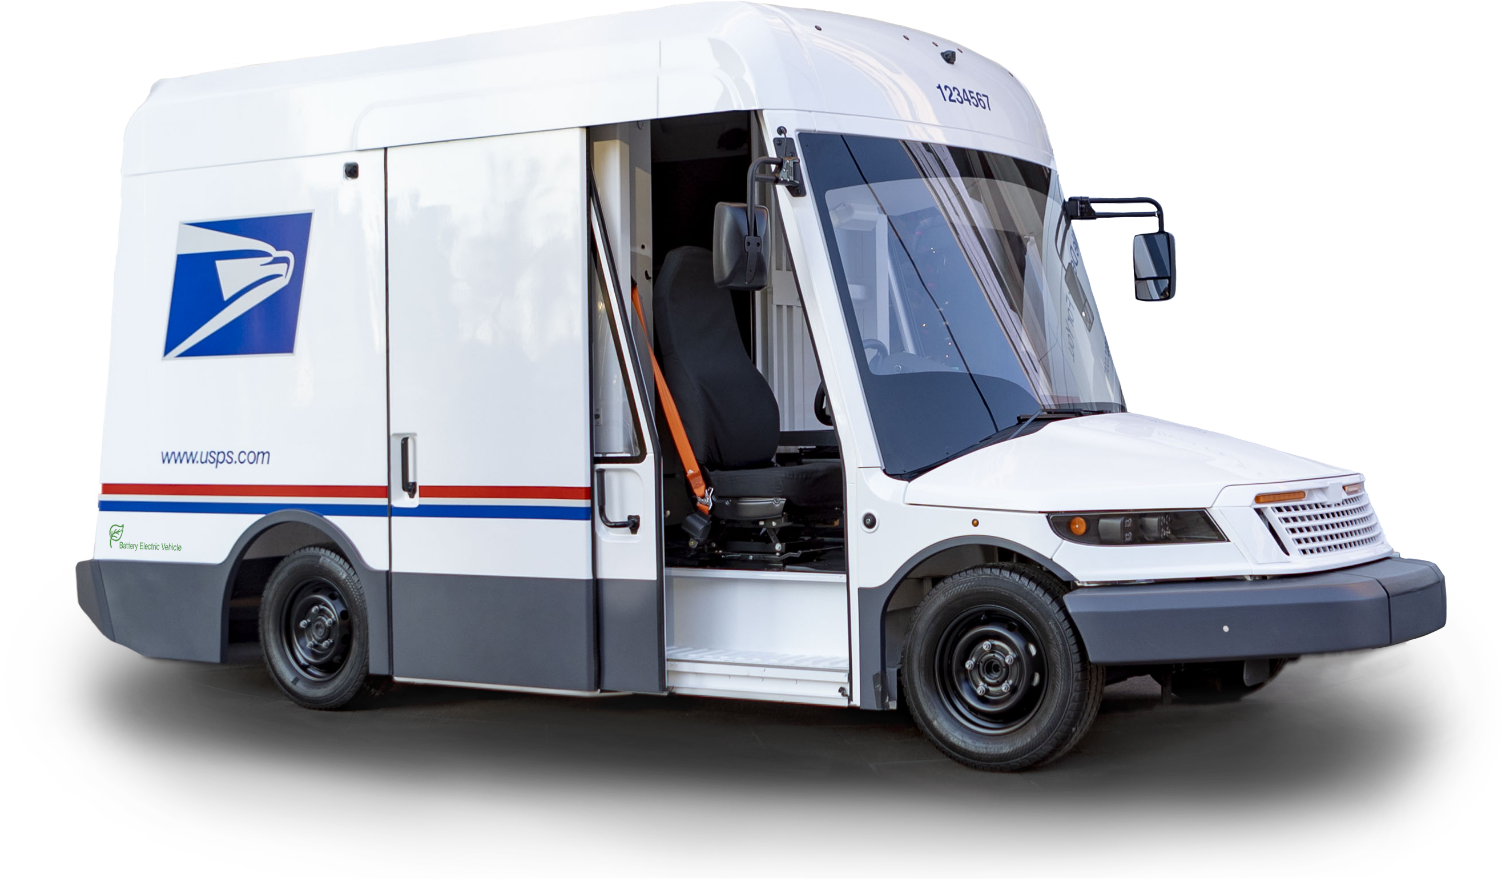 Usps promo truck electric